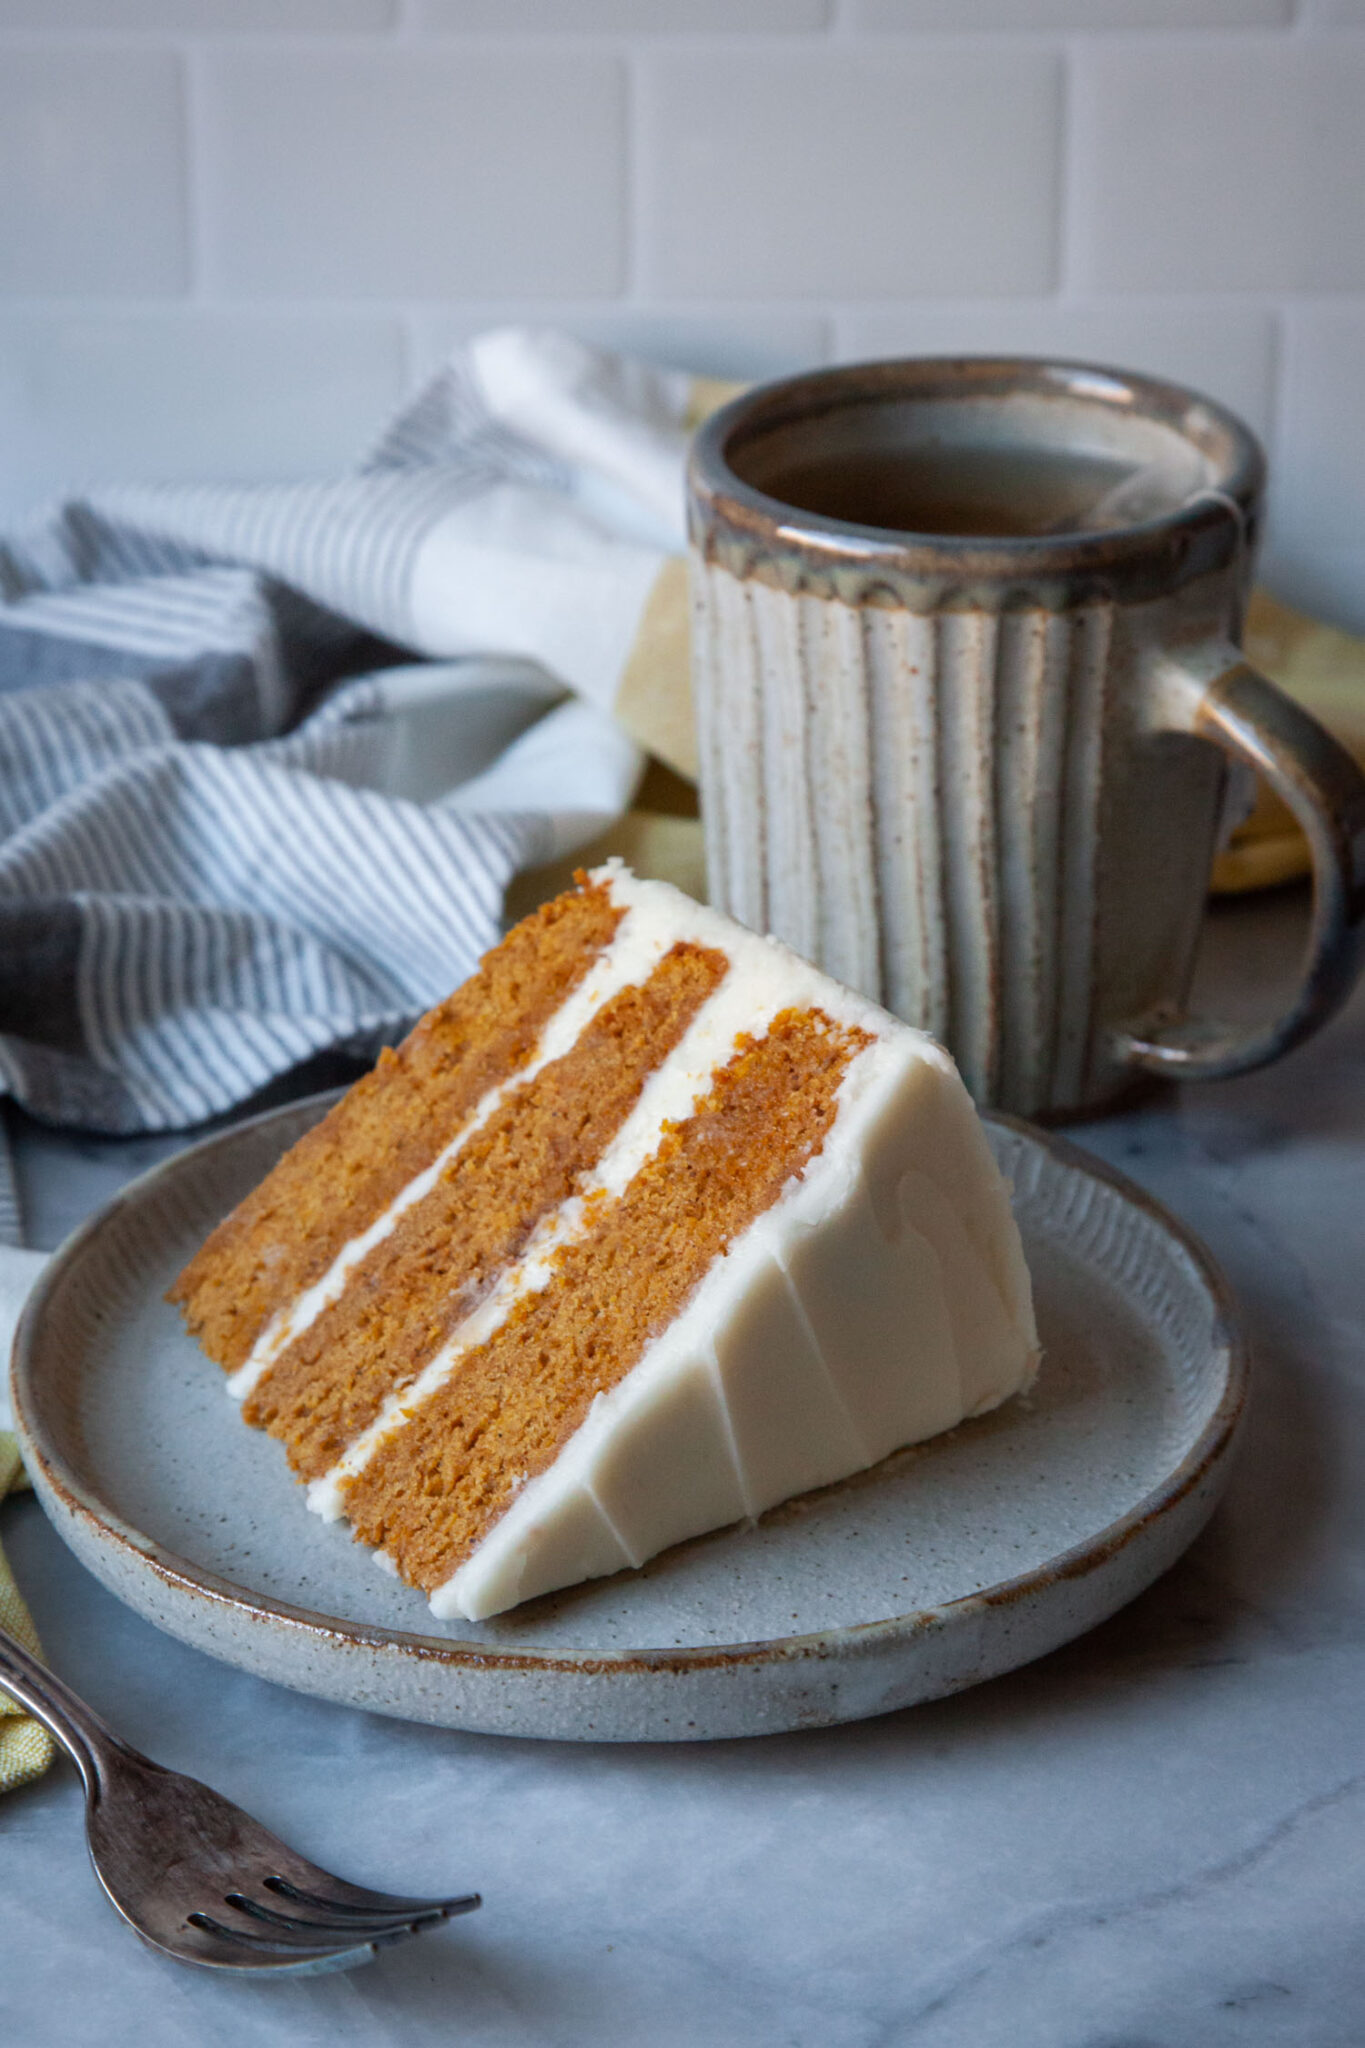 A slice of pumpkin layer cake on a plate, with a mug of tea behind it.